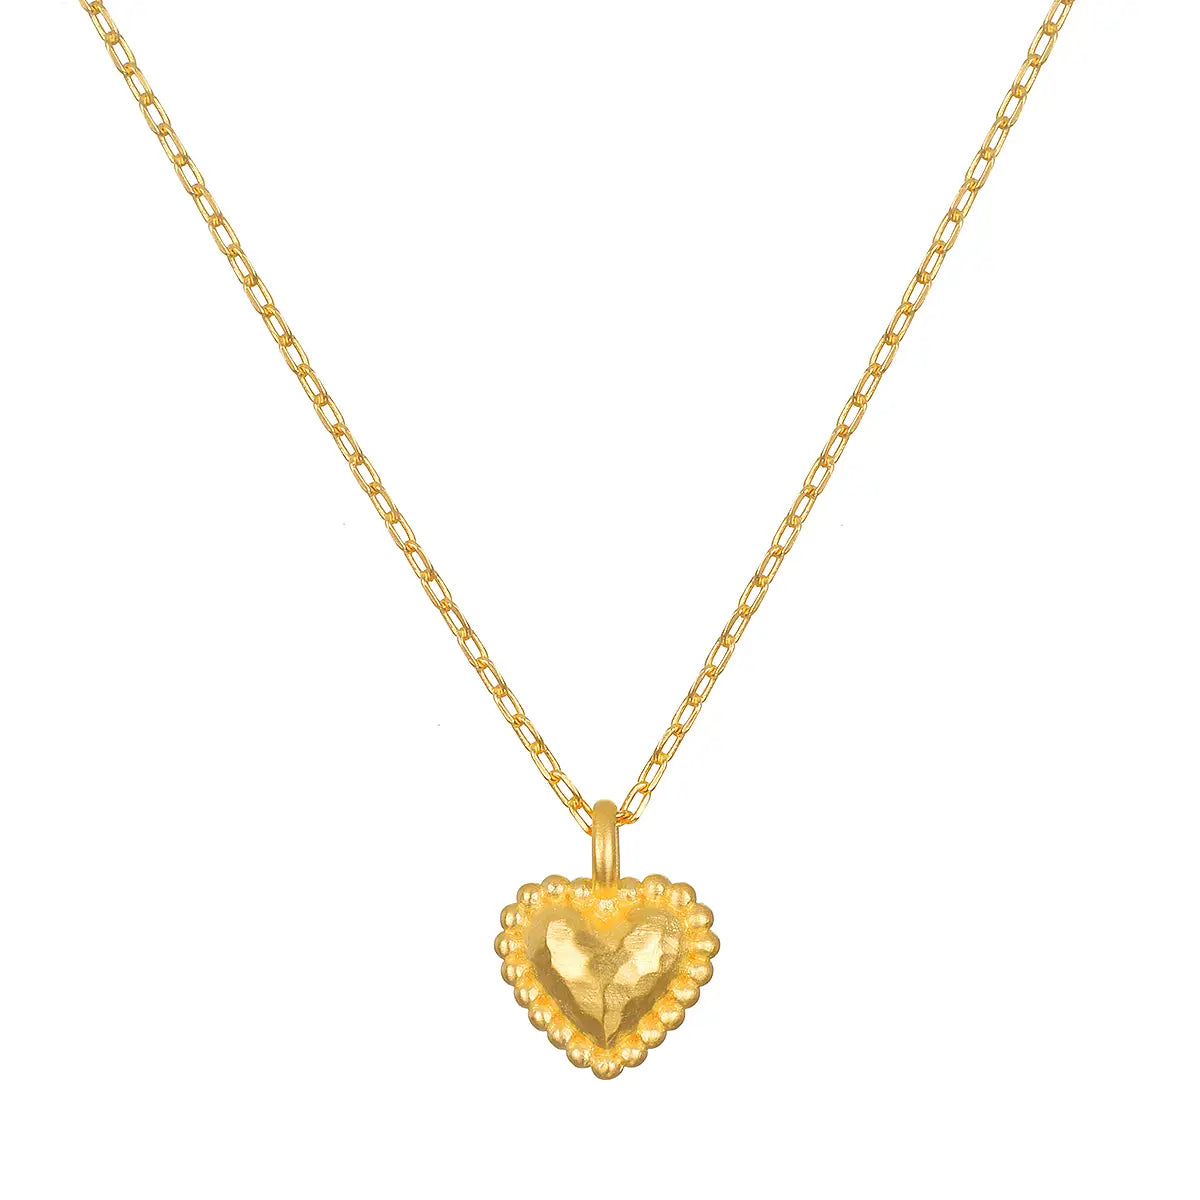 HAMMERED DOT HEART PENDANT NECKLACE